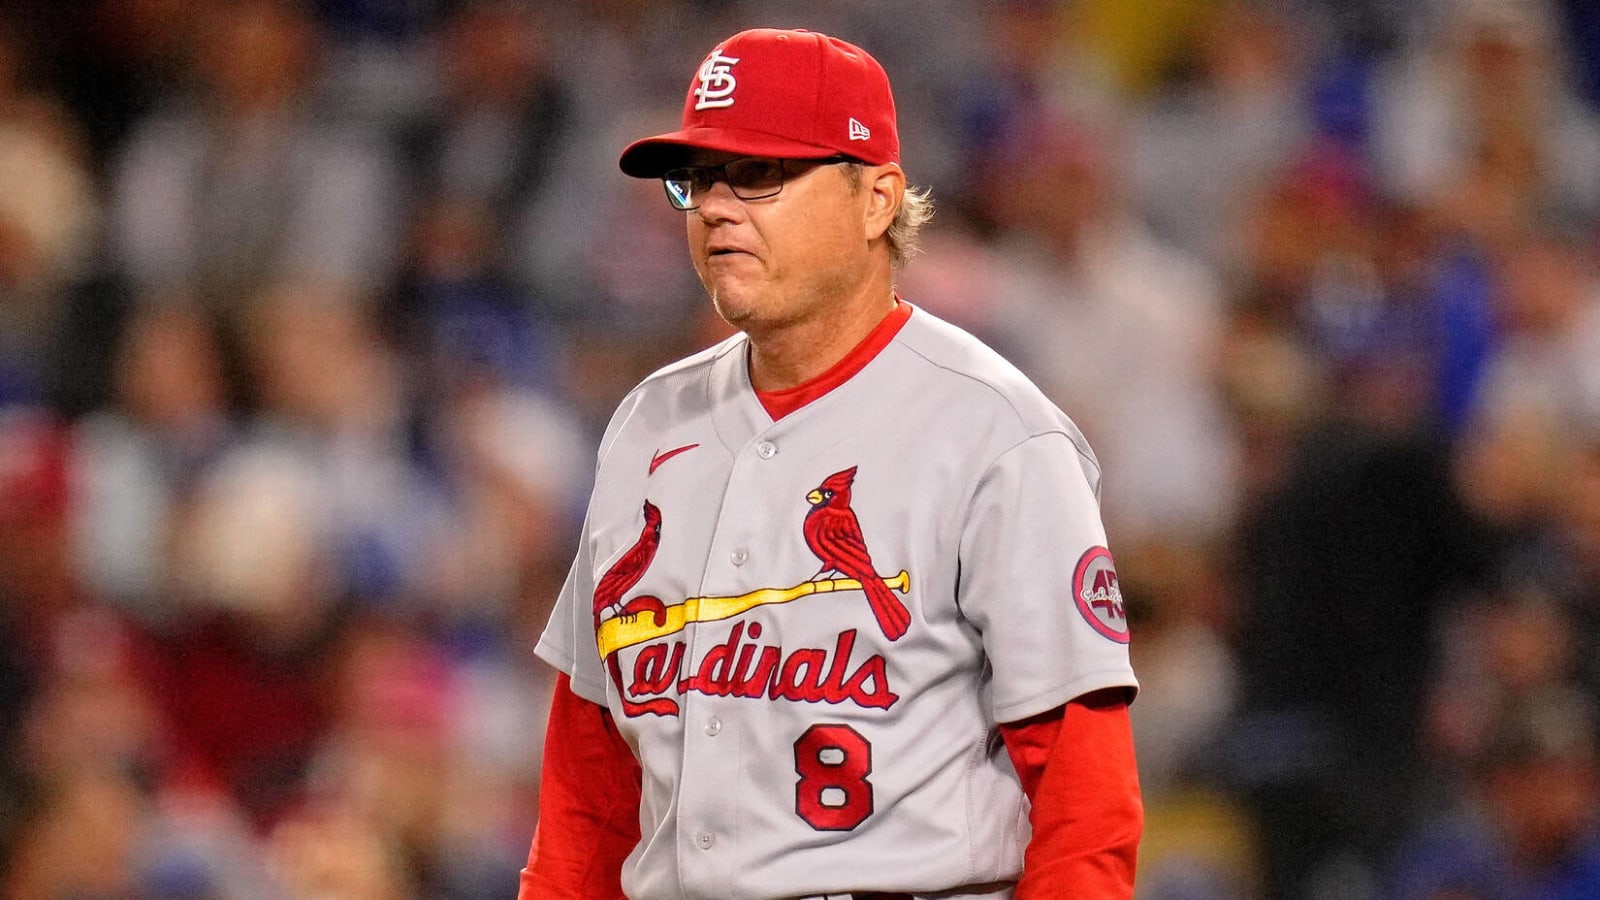 Mike Shildt interested in future managerial opportunities